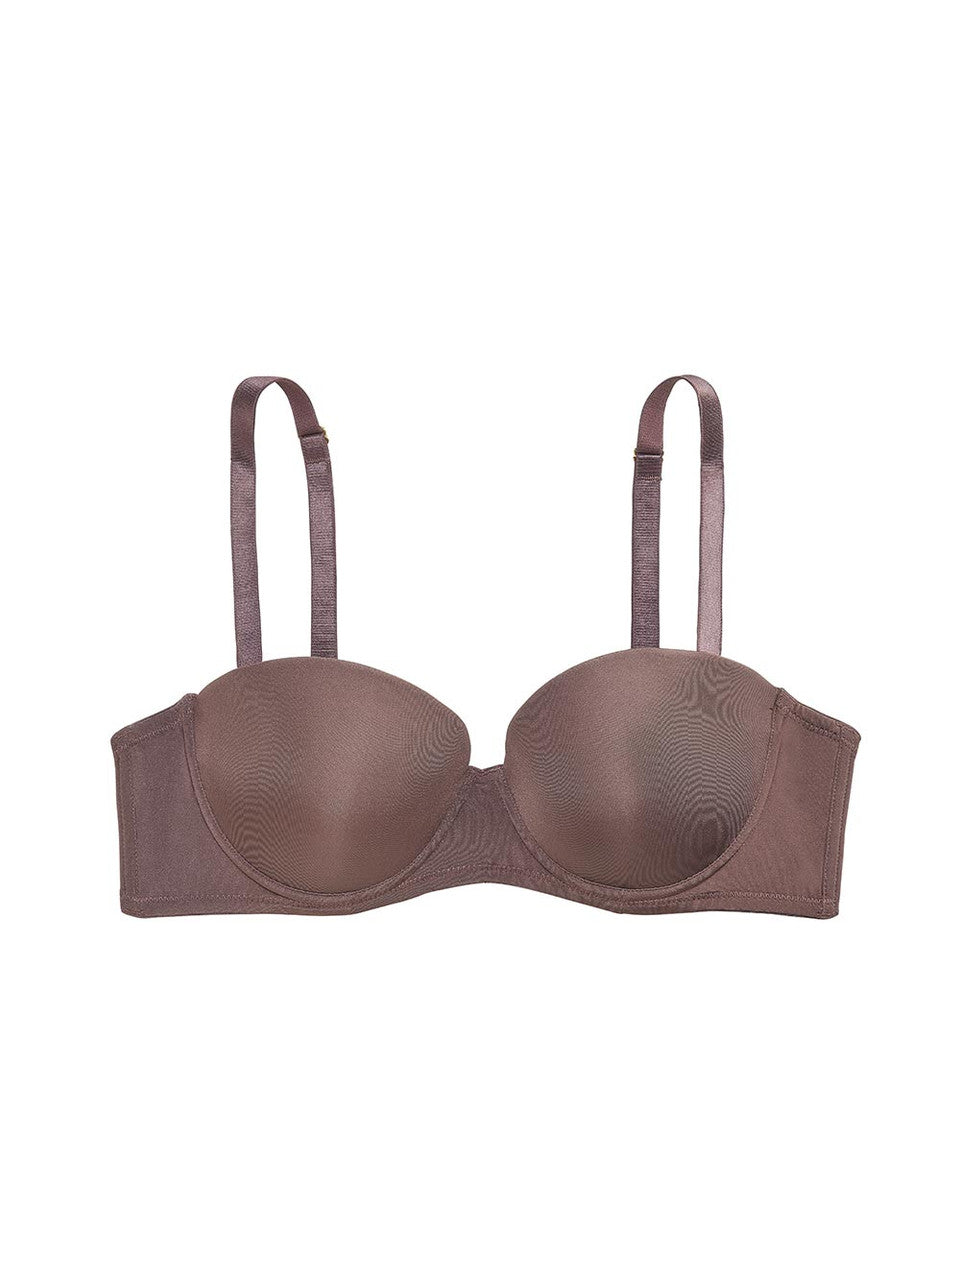 Sascha Smooth Strapless Bra - Chestnut front view product image